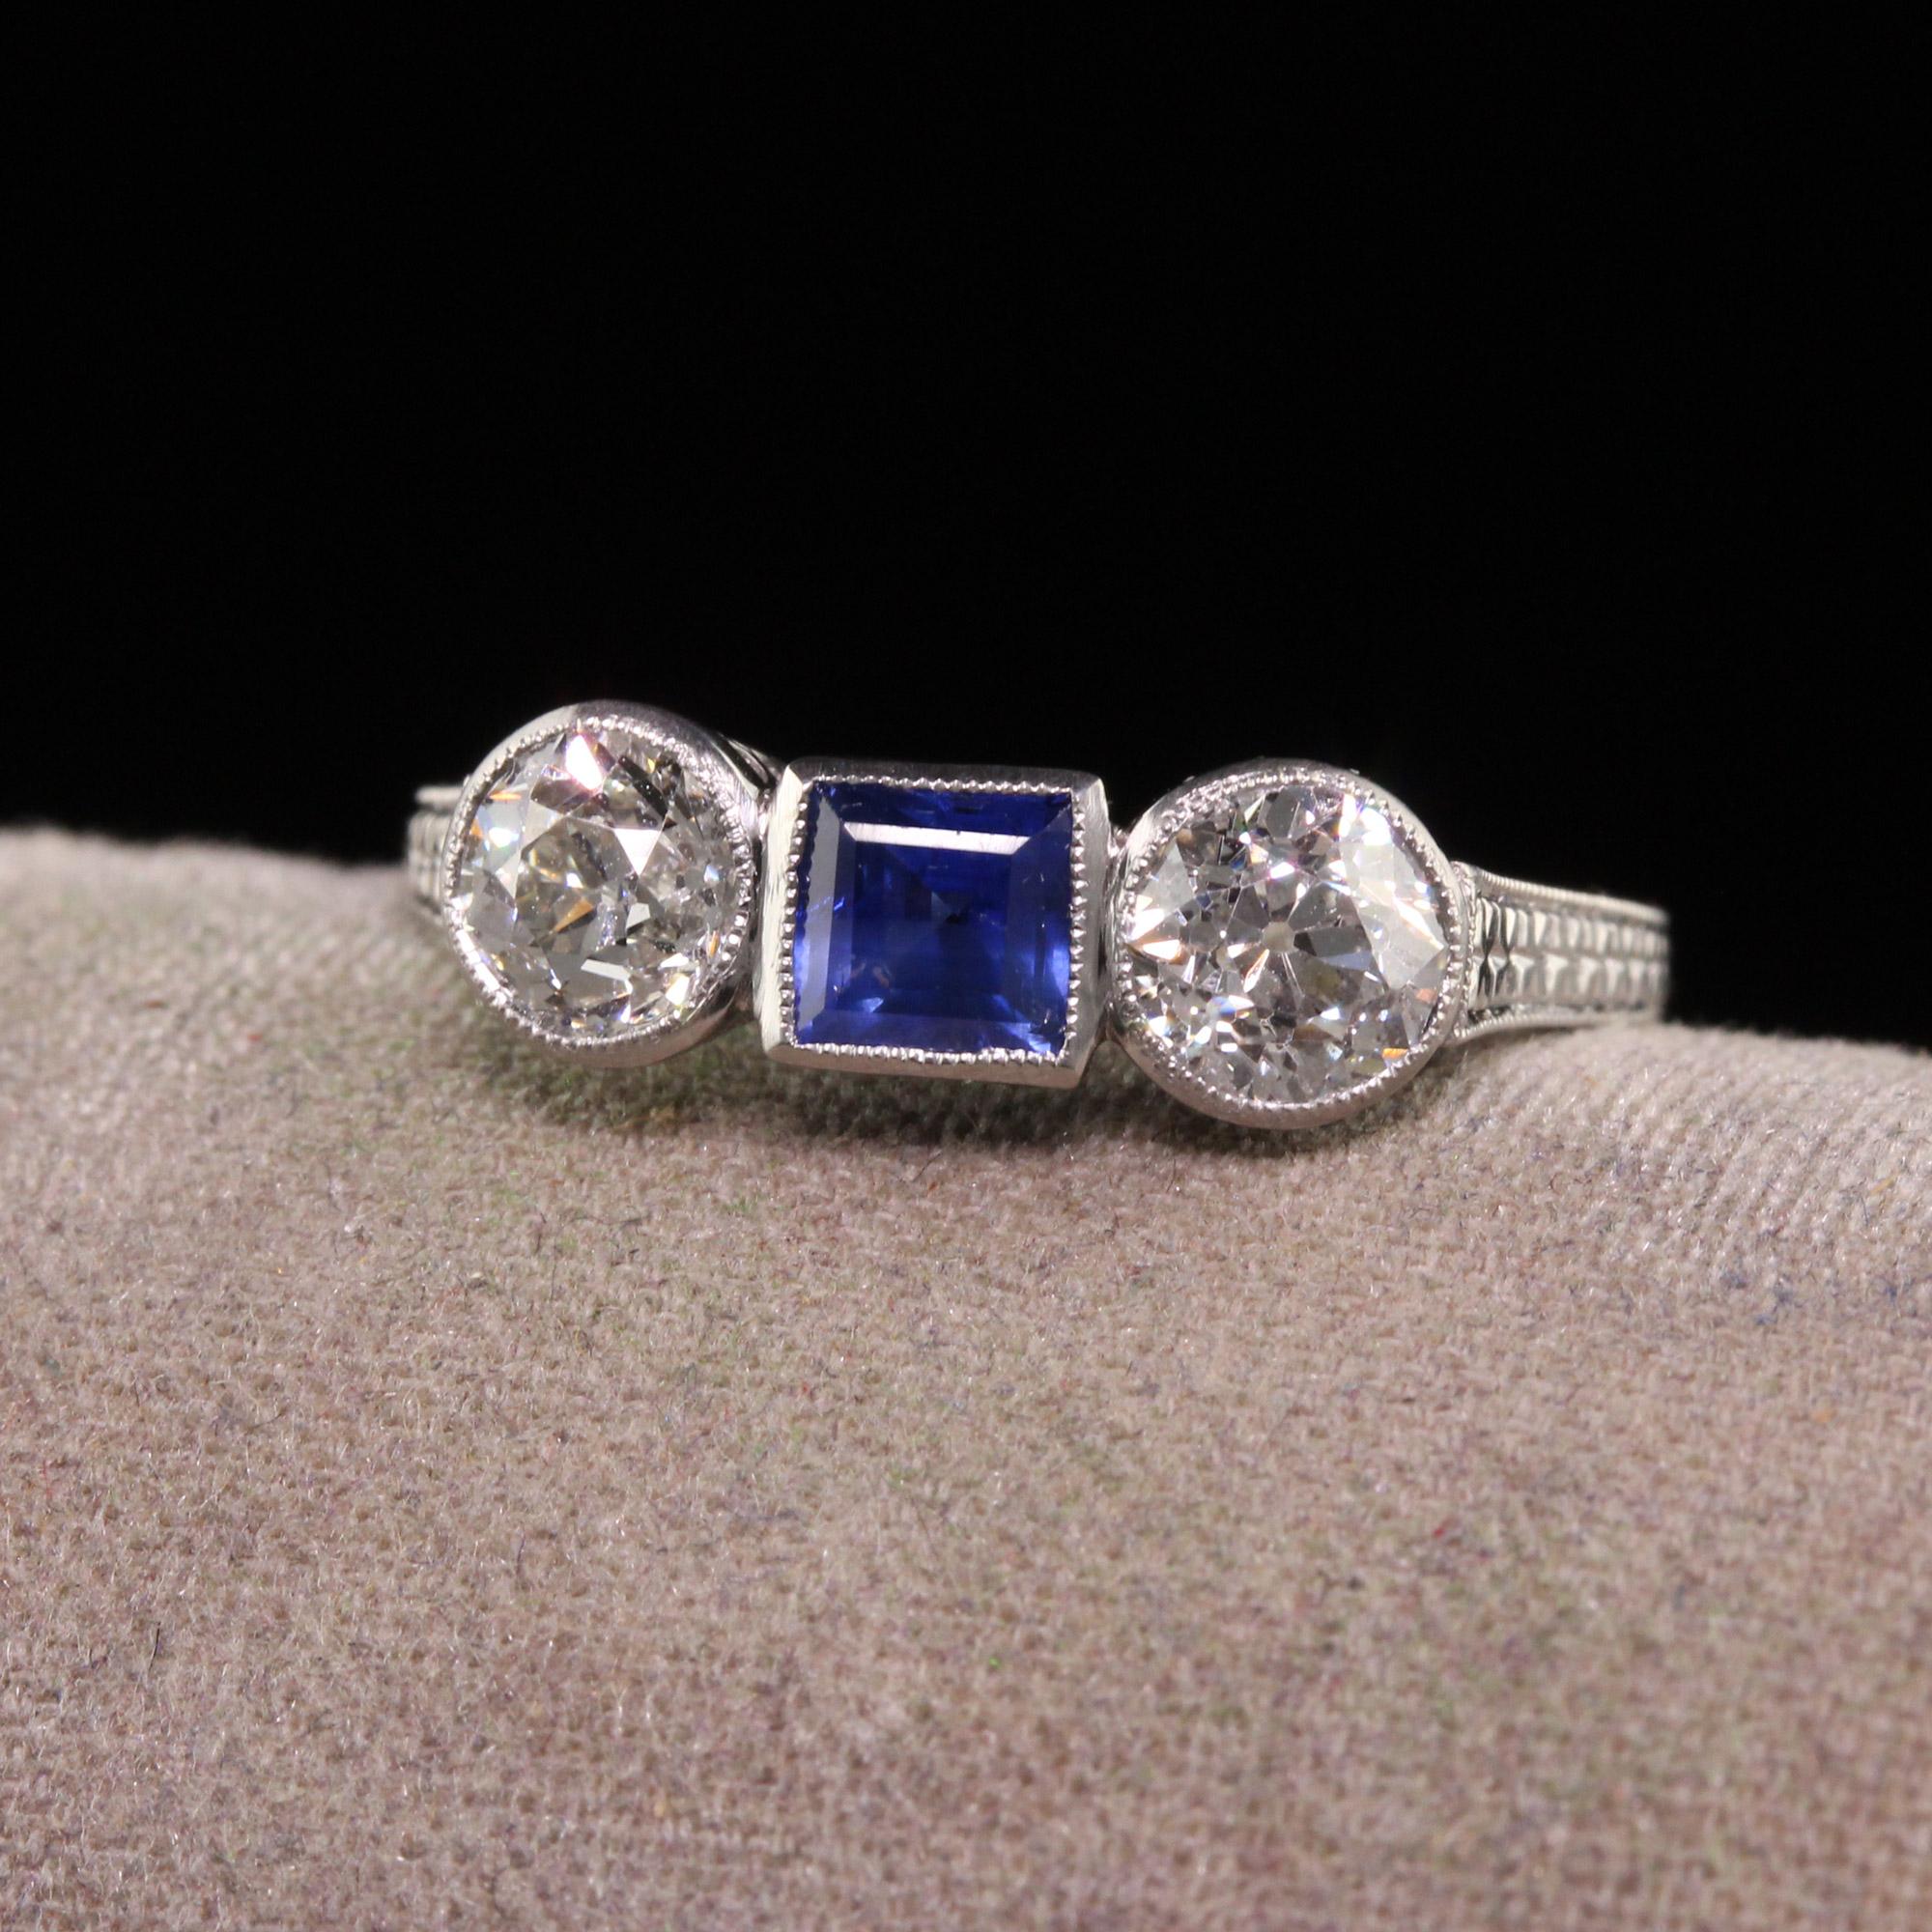 Beautiful Antique Art Deco Platinum Burma No Heat Sapphire Diamond Three Stone Ring - GIA. This beautiful ring is crafted in platinum. The ring features a natural Burma untreated sapphire in the center and has two old european cut diamonds set in a